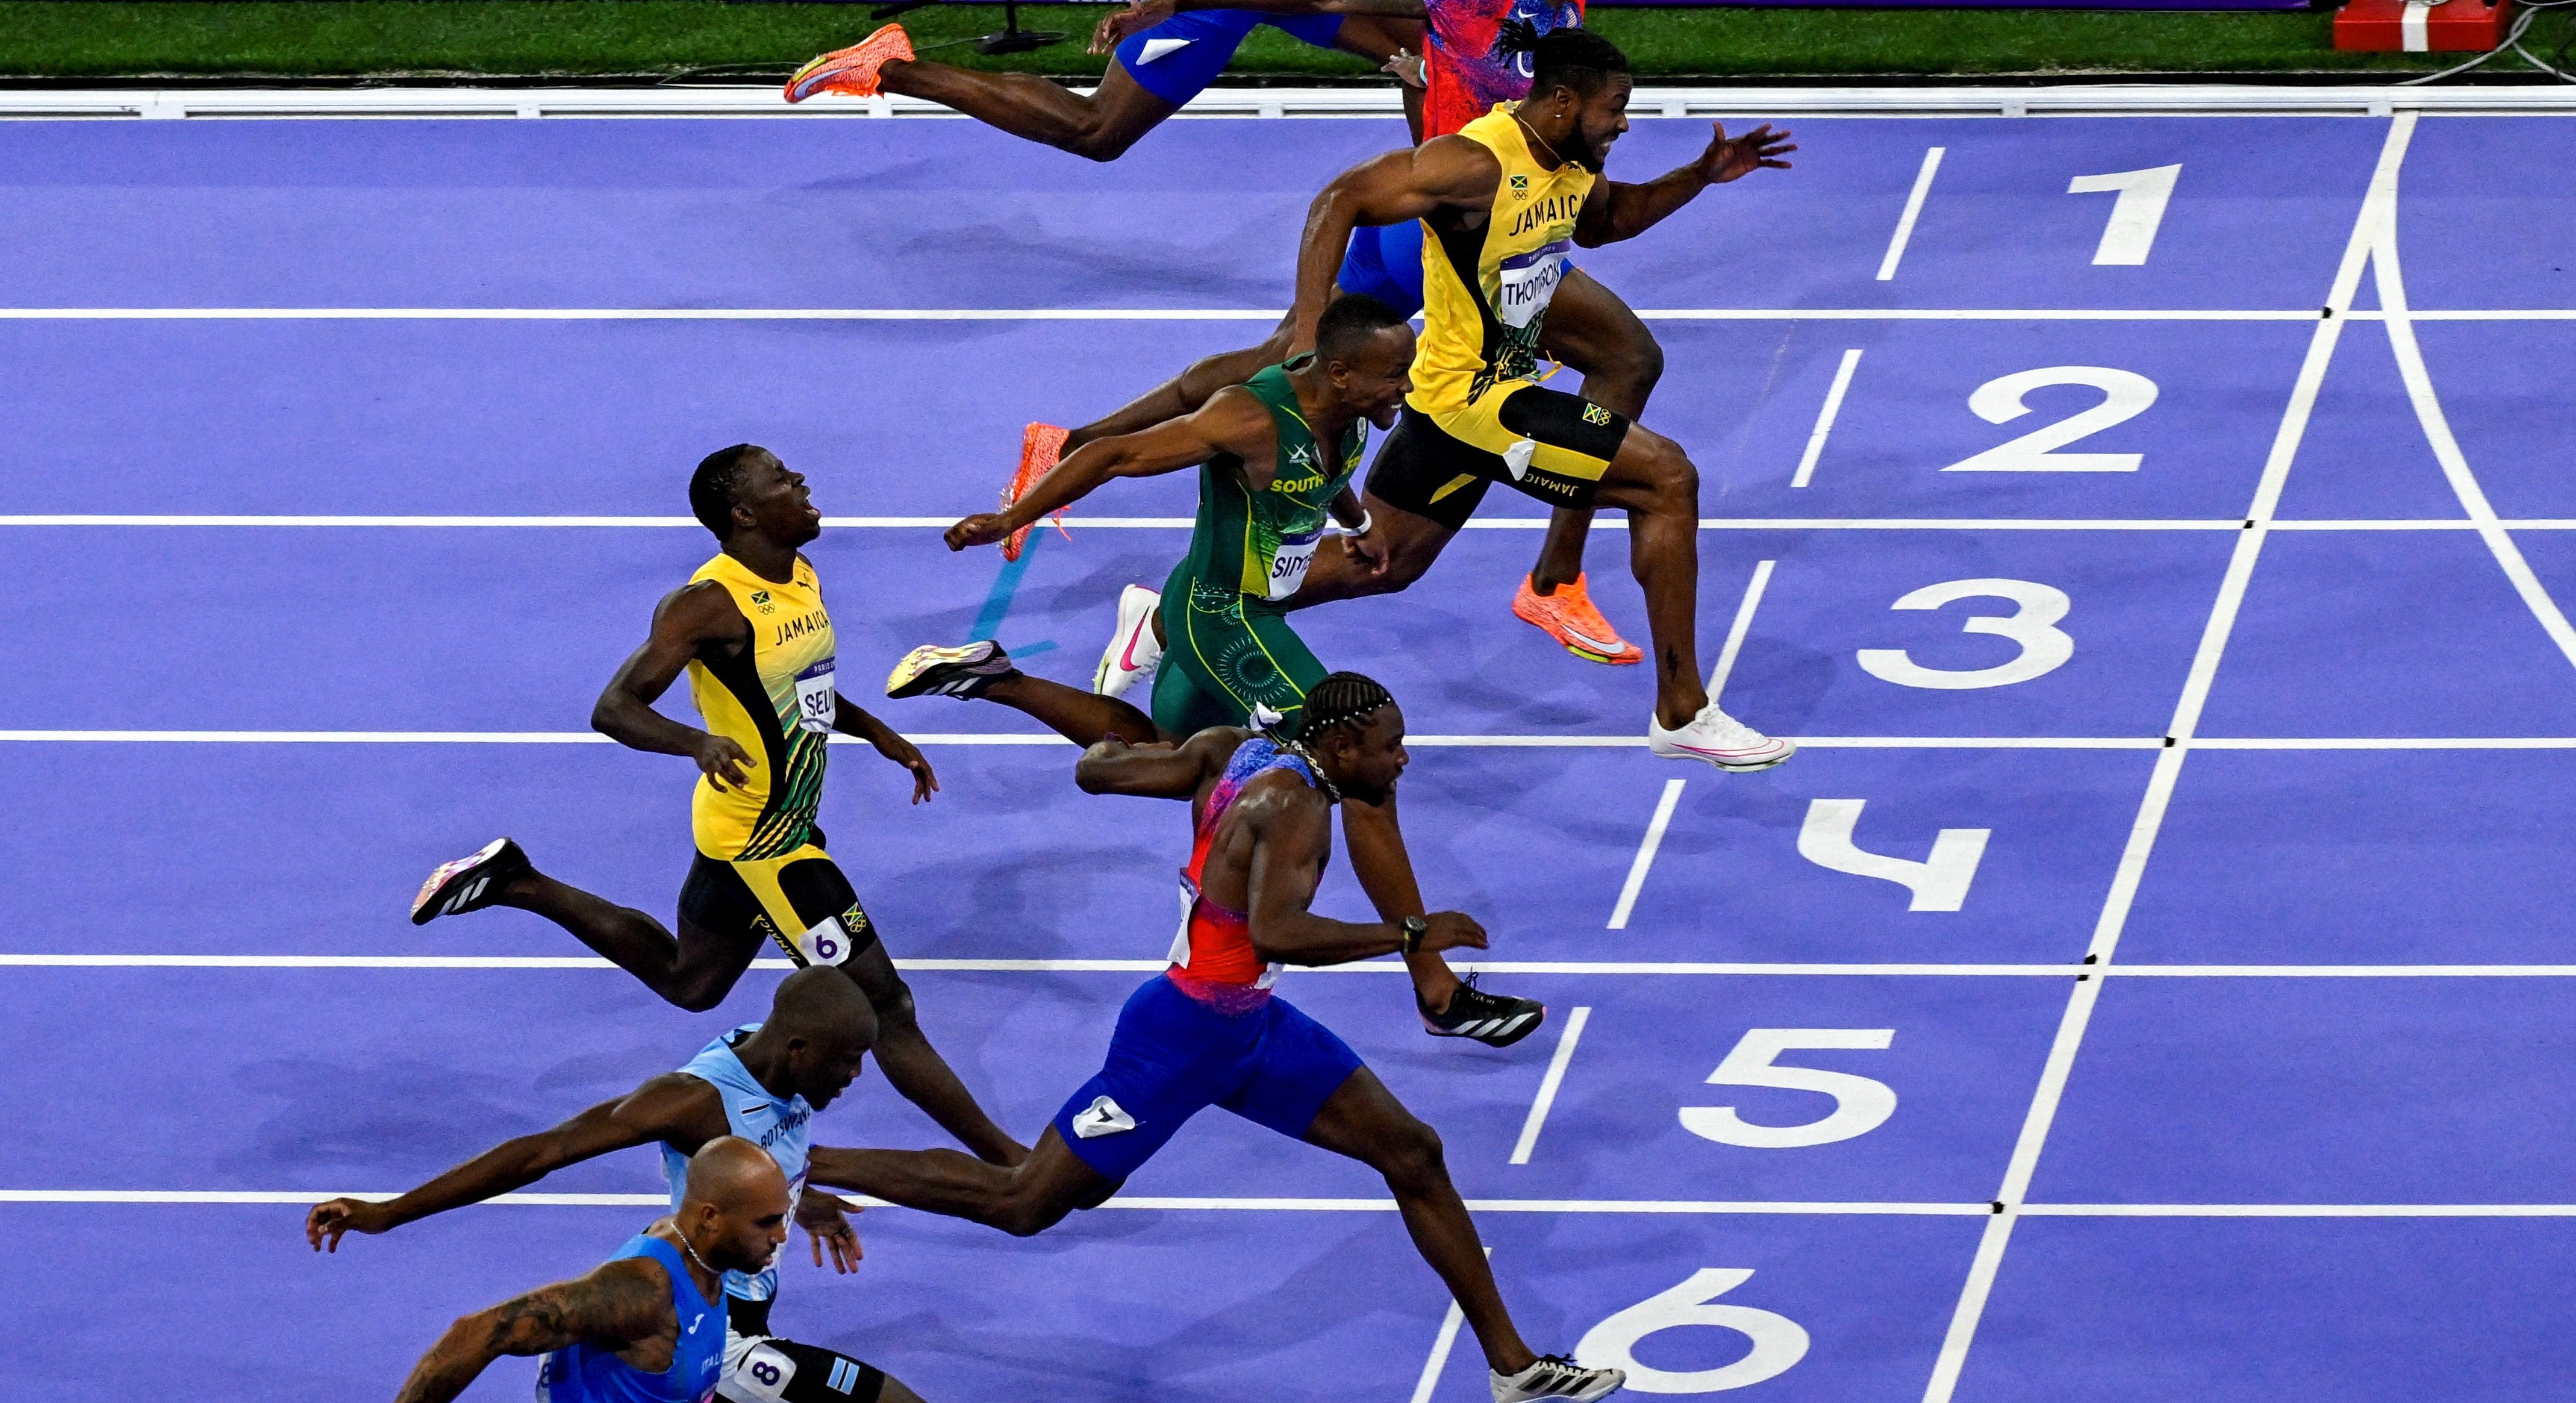 The photo finish on Noah Lyles' Olympic men's 100m gold medal win had fans completely stunned